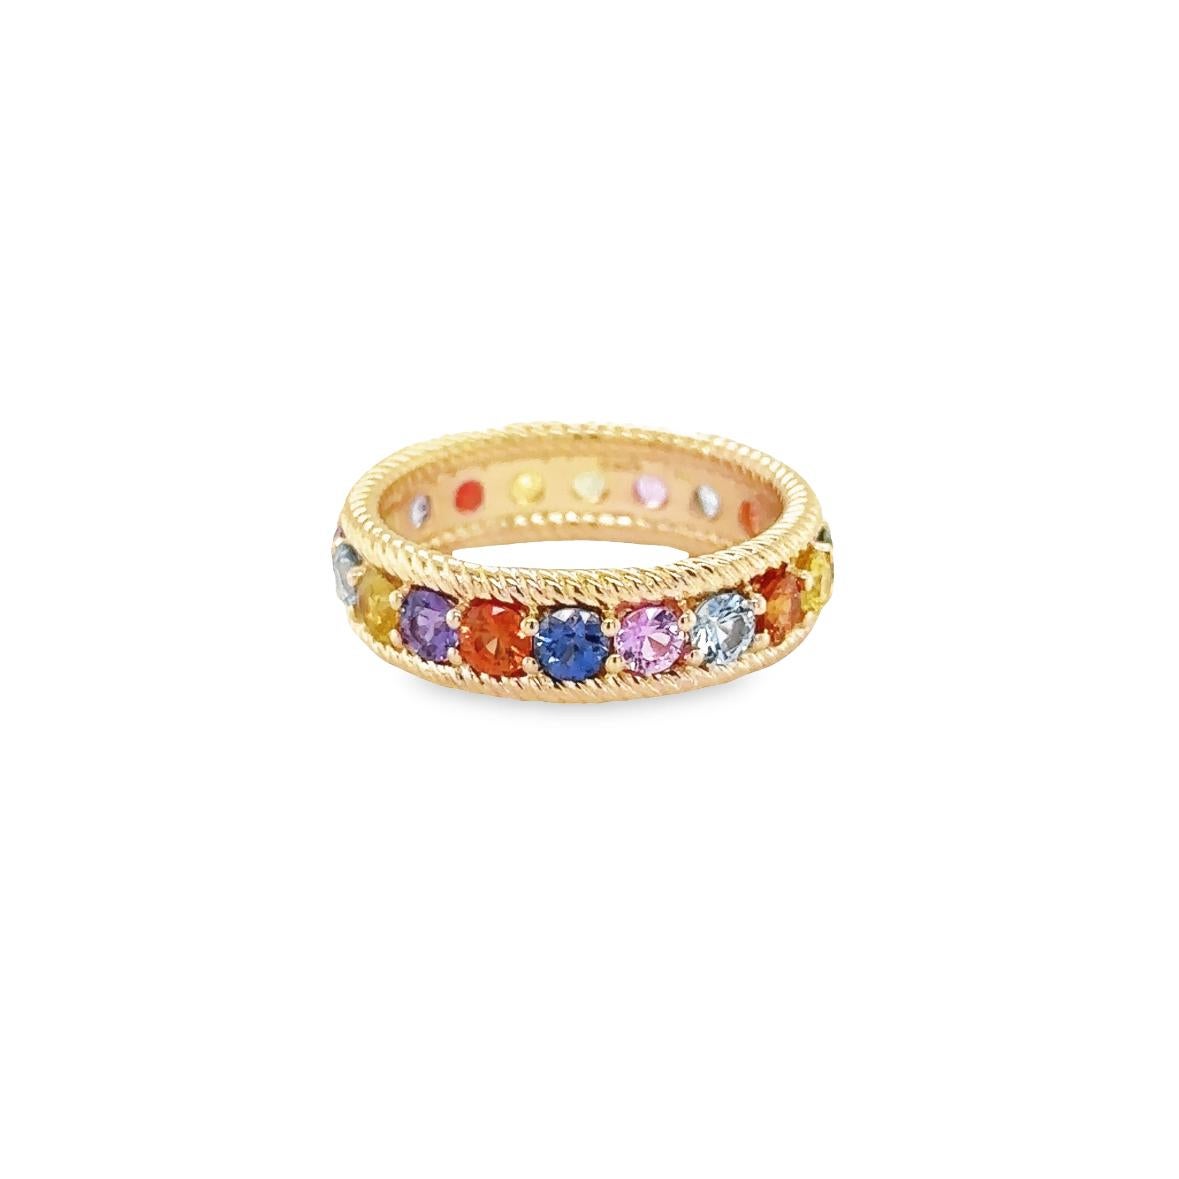 RIAD Ring in rose gold 18Kt 5.78 gr with Colored Sapphires 2.87 ct.

It is 110th anniversary of the creation of VITALE 1913 in 2023, we offer a personalized engraving with initials as a unique gift from Monaco !! Perfect for manly and chic look!